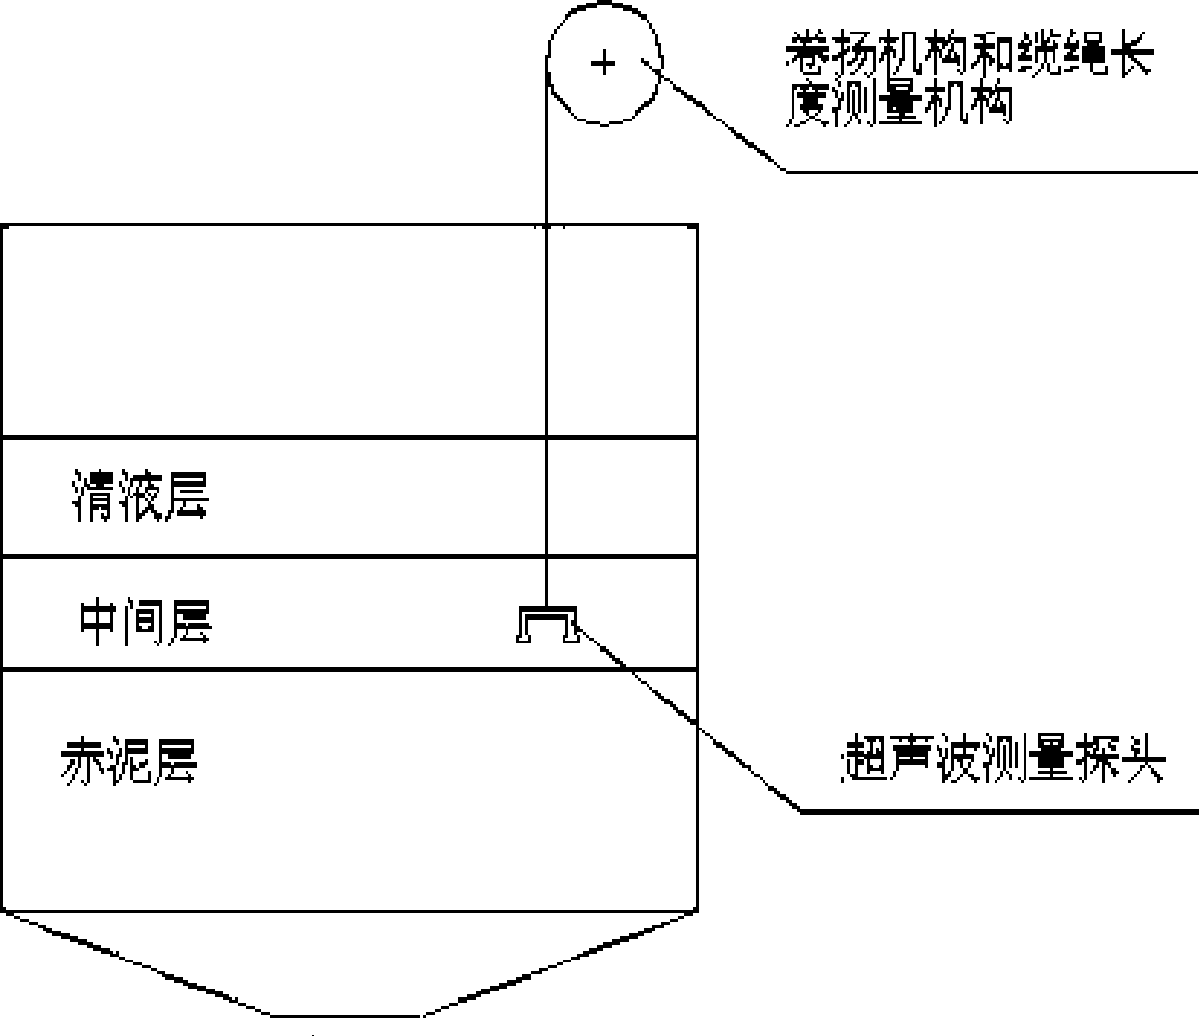 Interface analysis apparatus for double-floating ball red mud setting tank